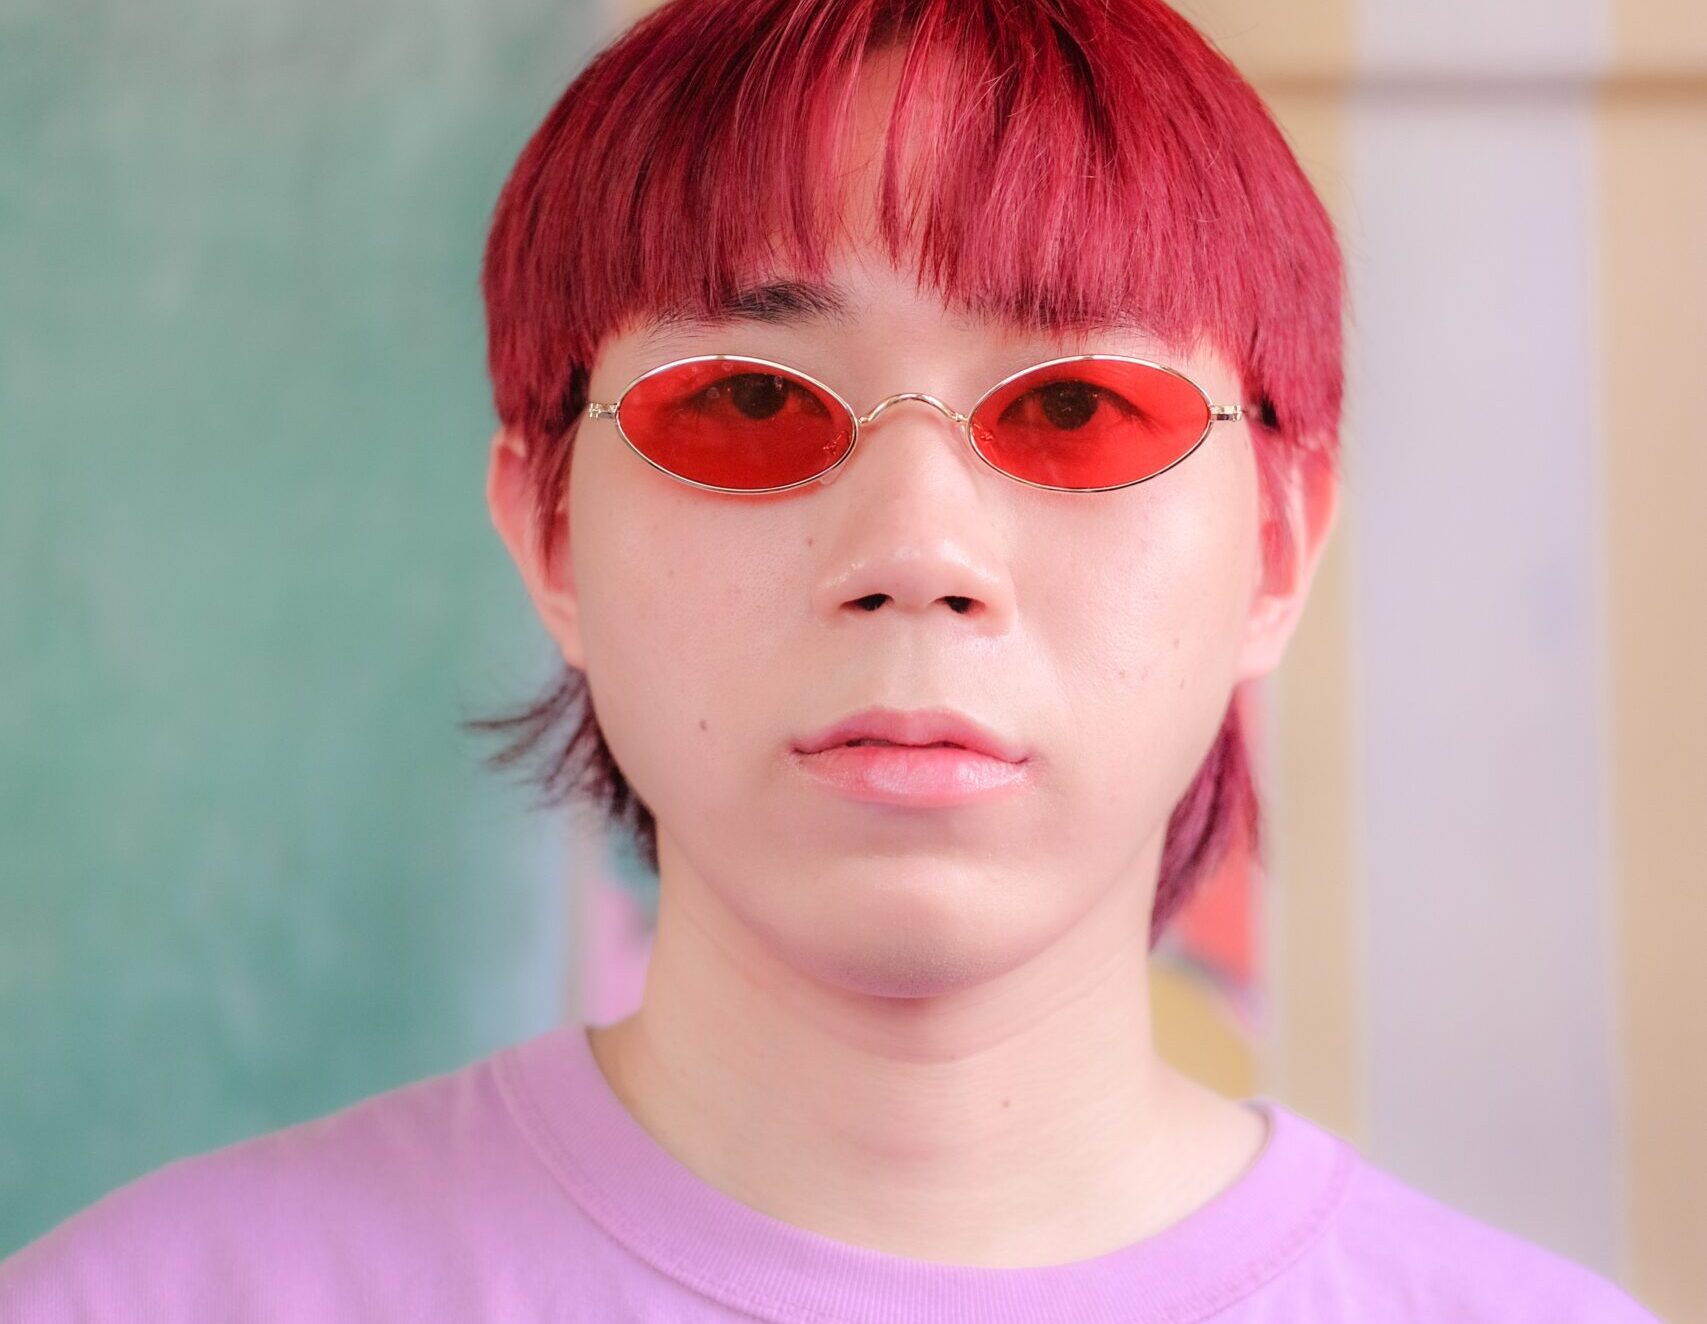 Man wearing red-tinted glasses and a pink shirt